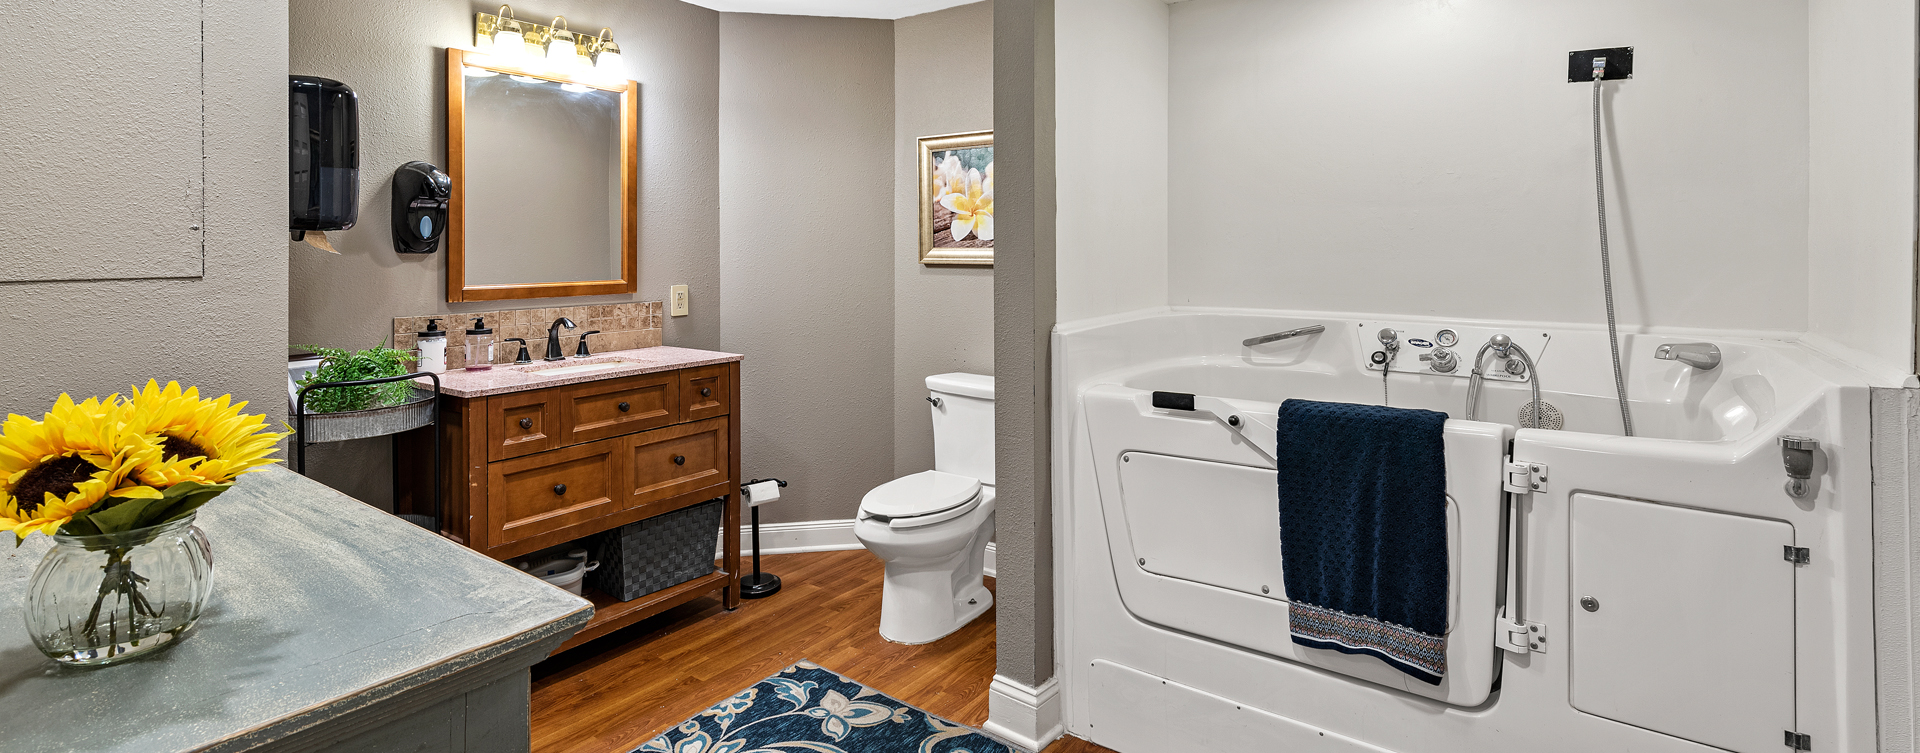 With an easy access design, our whirlpool allows you to enjoy a warm bath safely and comfortably at Bickford of Bexley